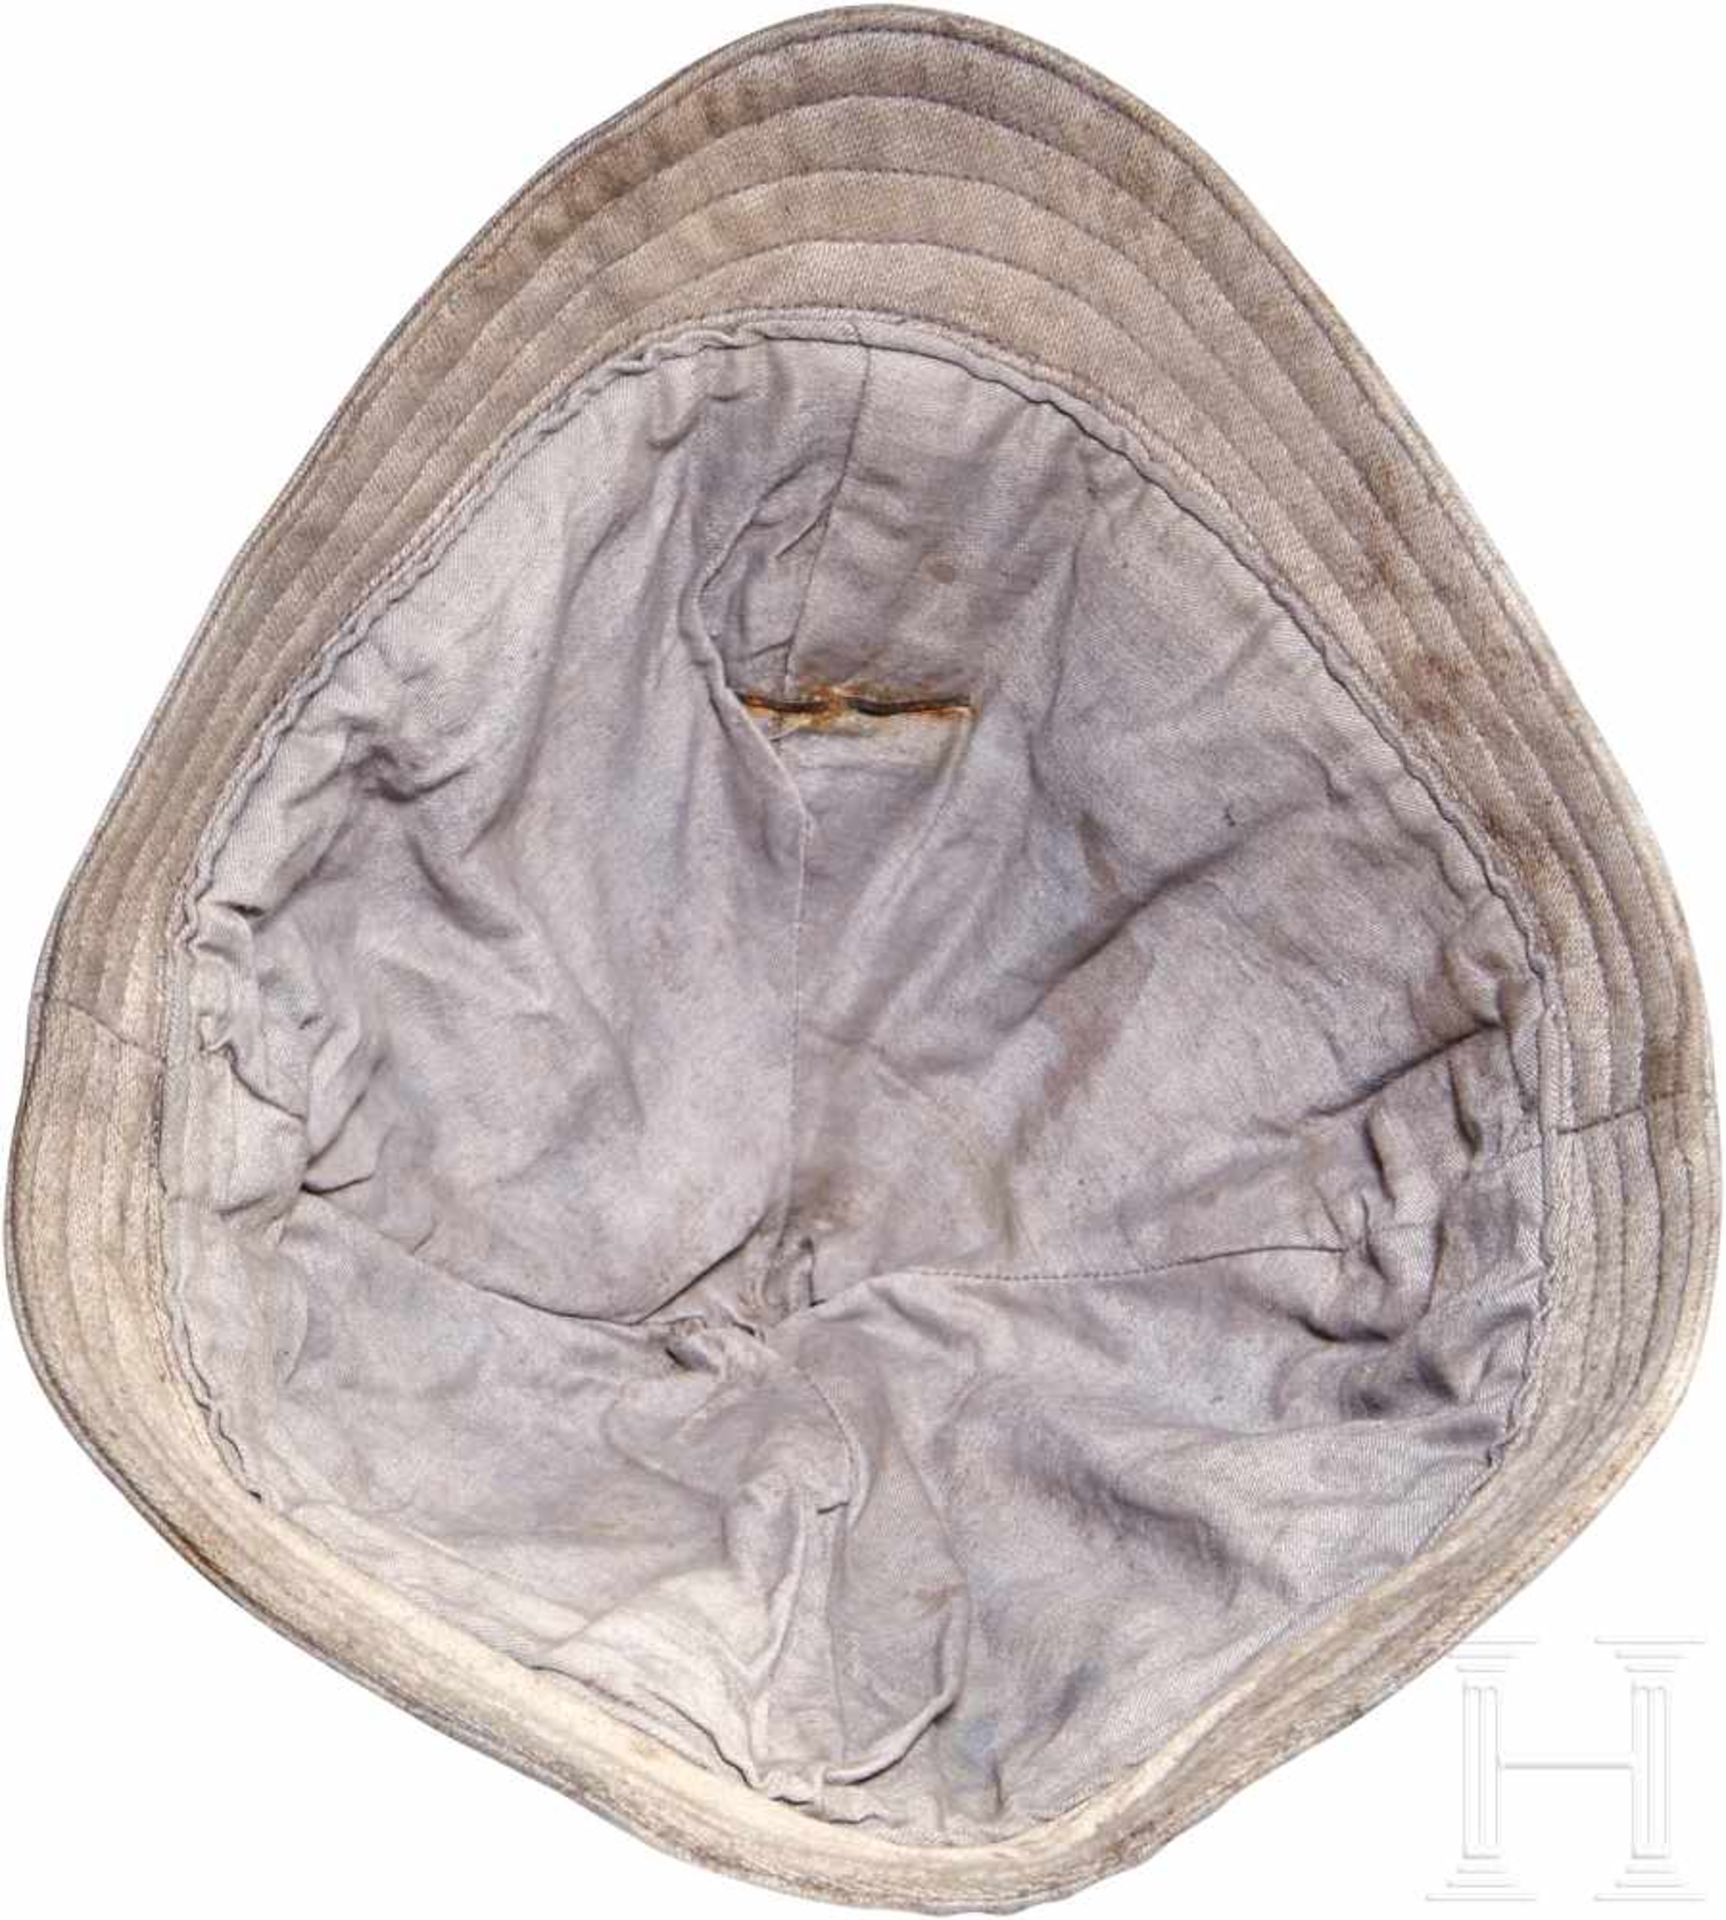 A White Budenovka CapWhite fabric summer "Budenovka" style cap used by troops in the civil war and - Bild 8 aus 9